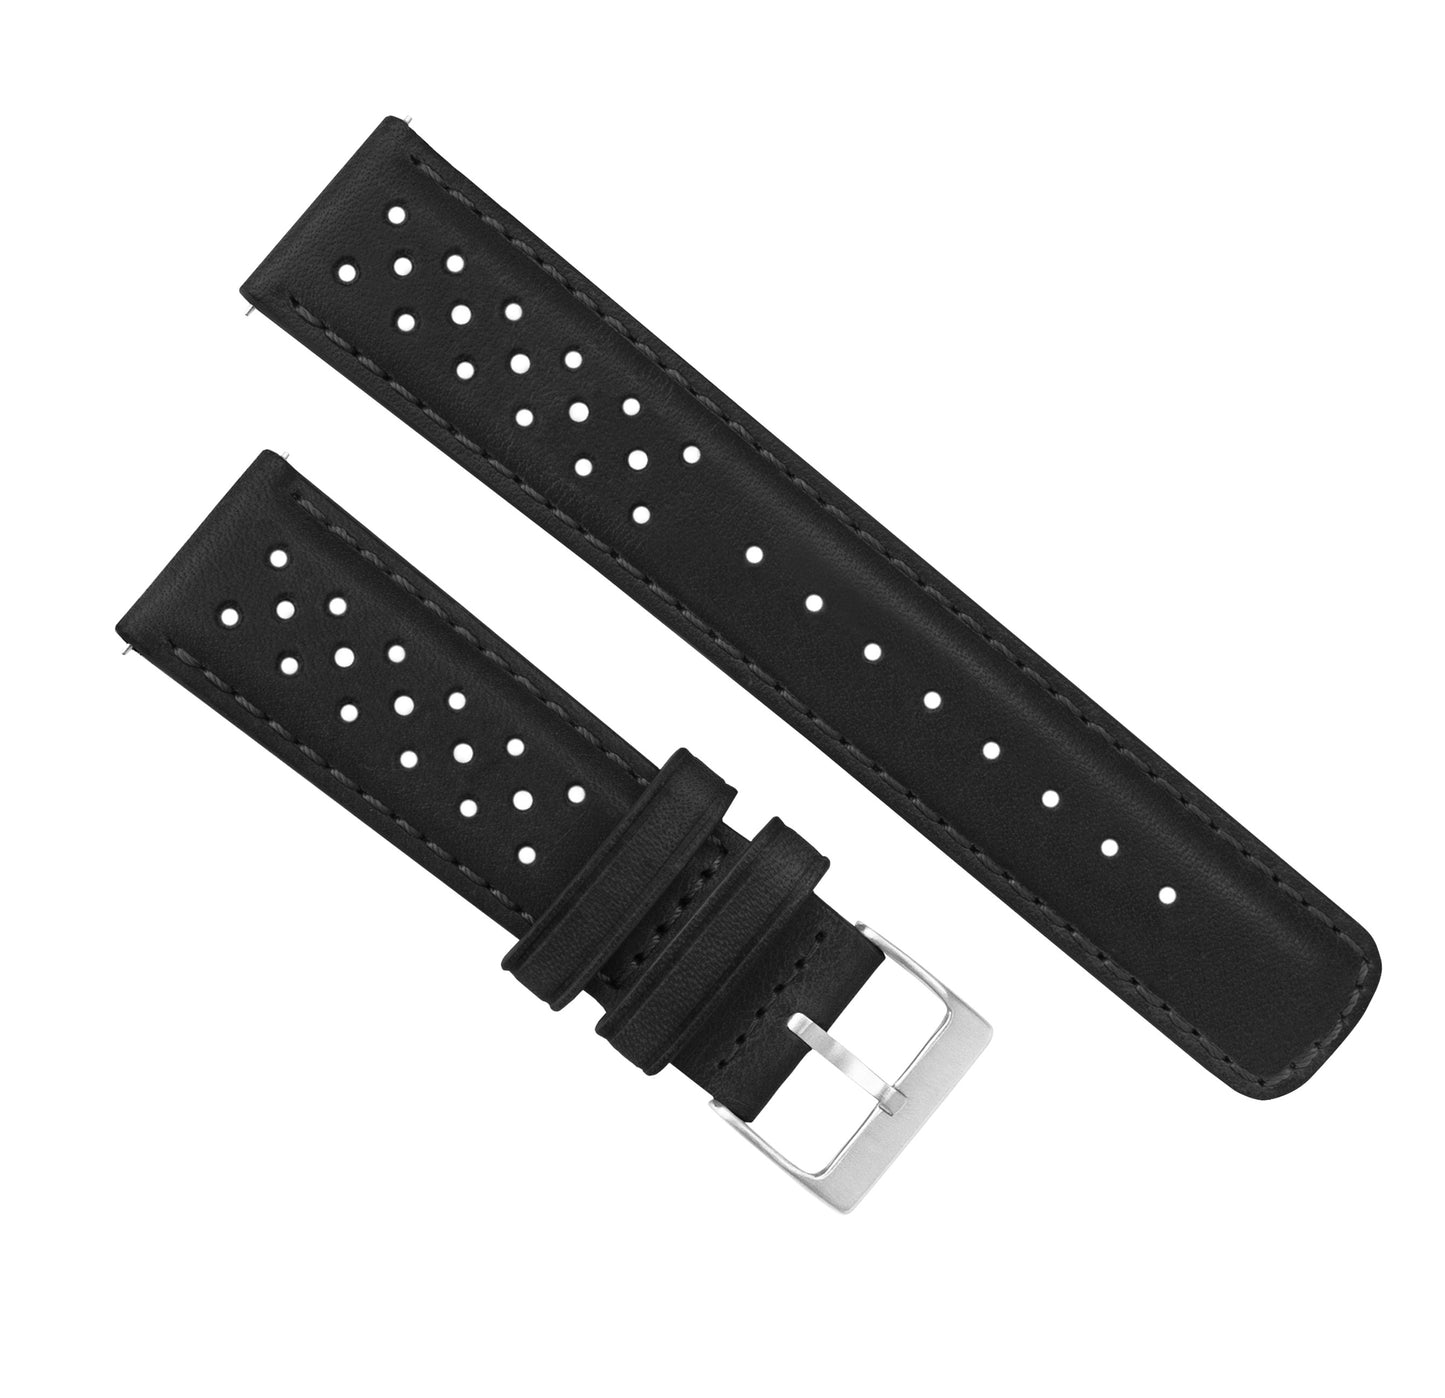 Black | Racing Horween Leather - Barton Watch Bands